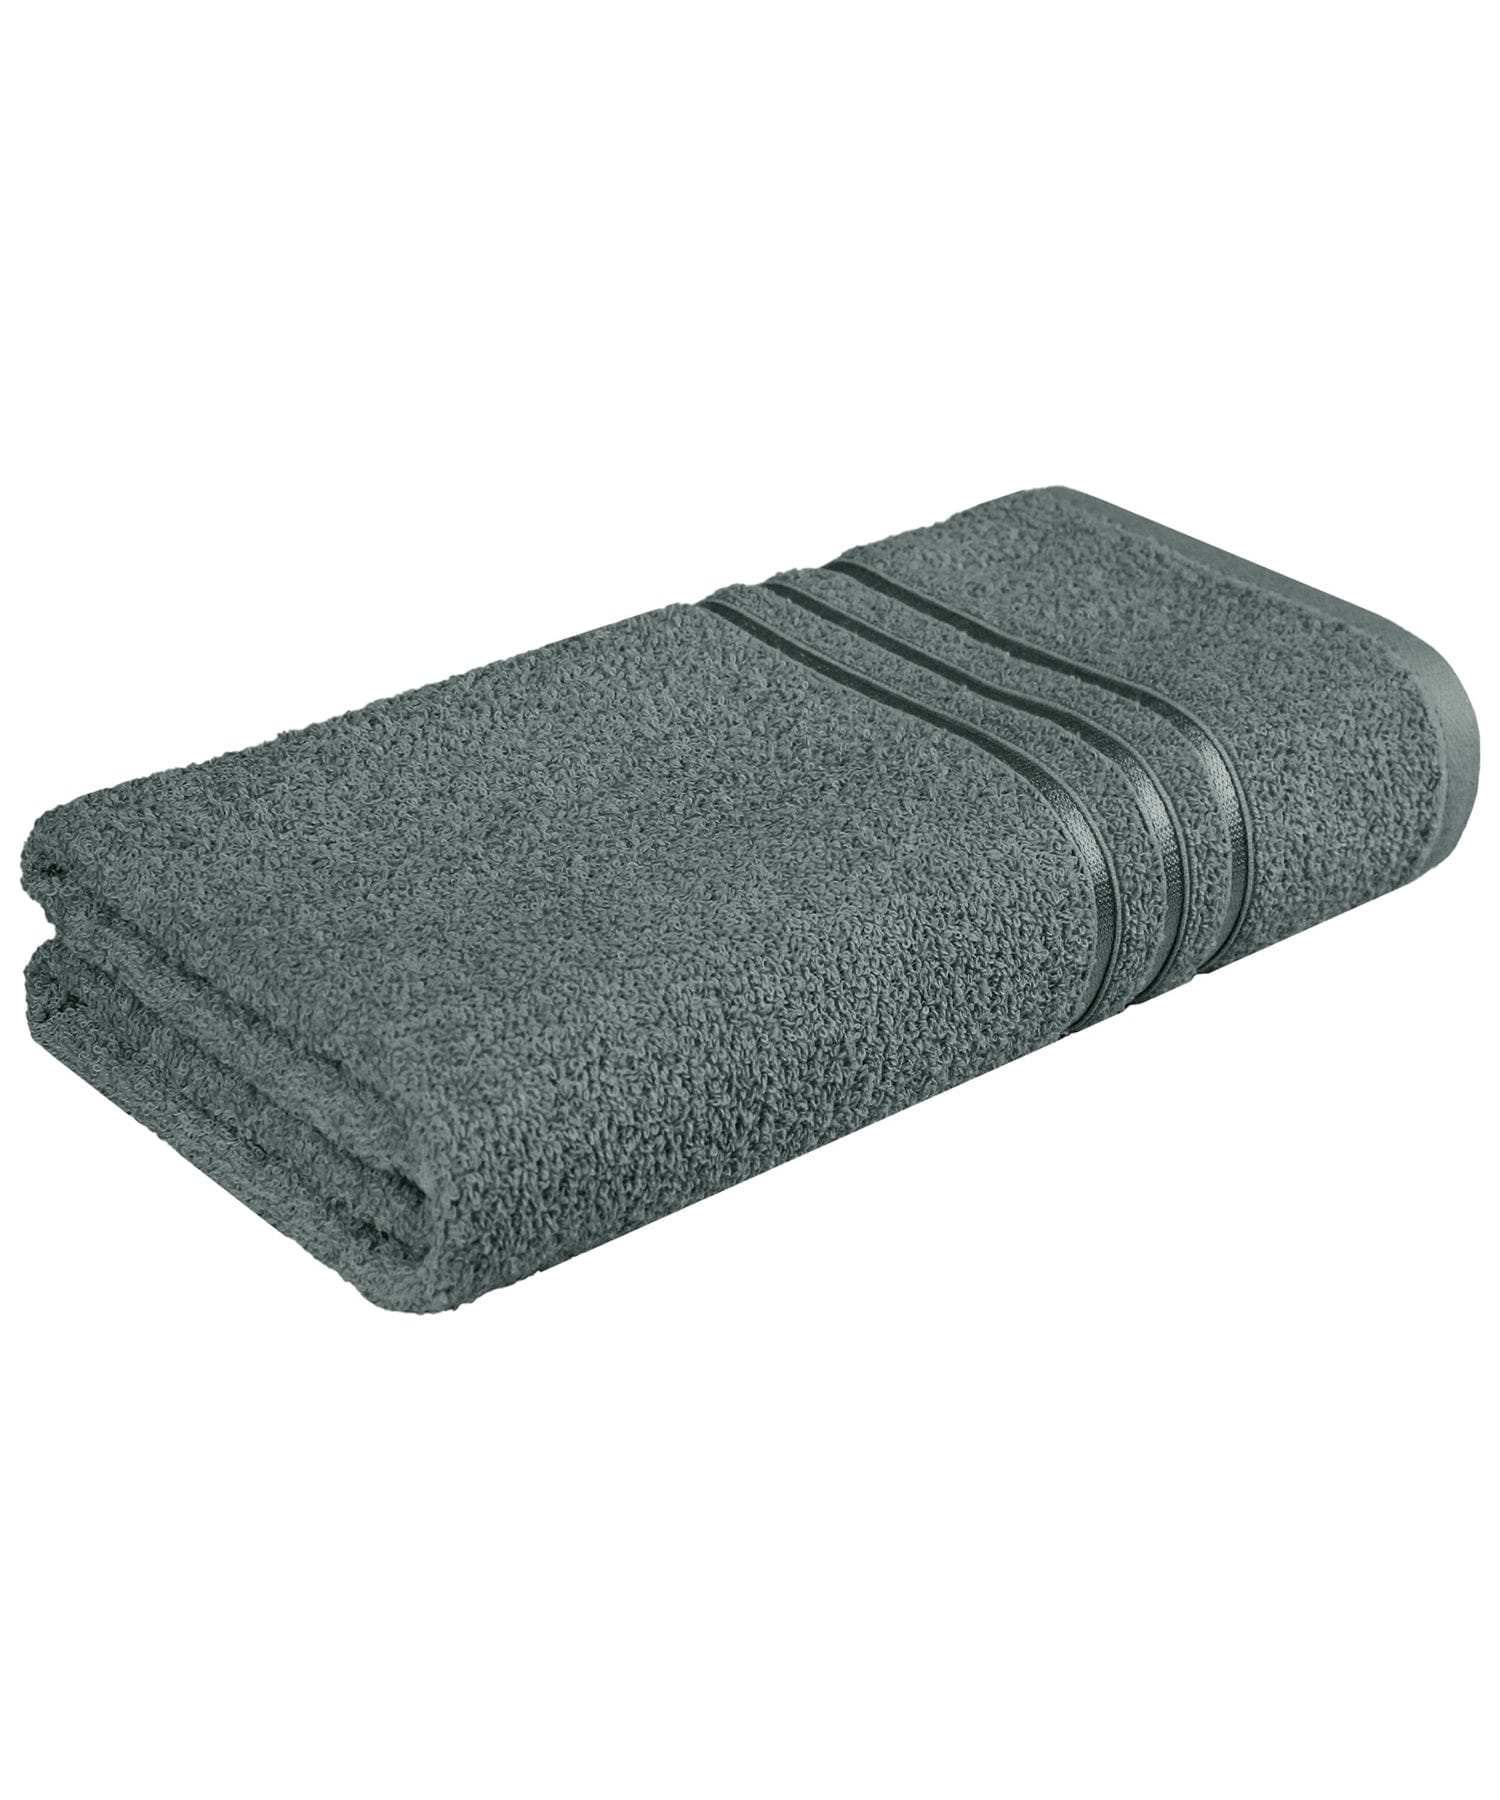 COMFORT LIVING TOWELS,100% Cotton,Quicky Dry,Light Weight, NEW GREY